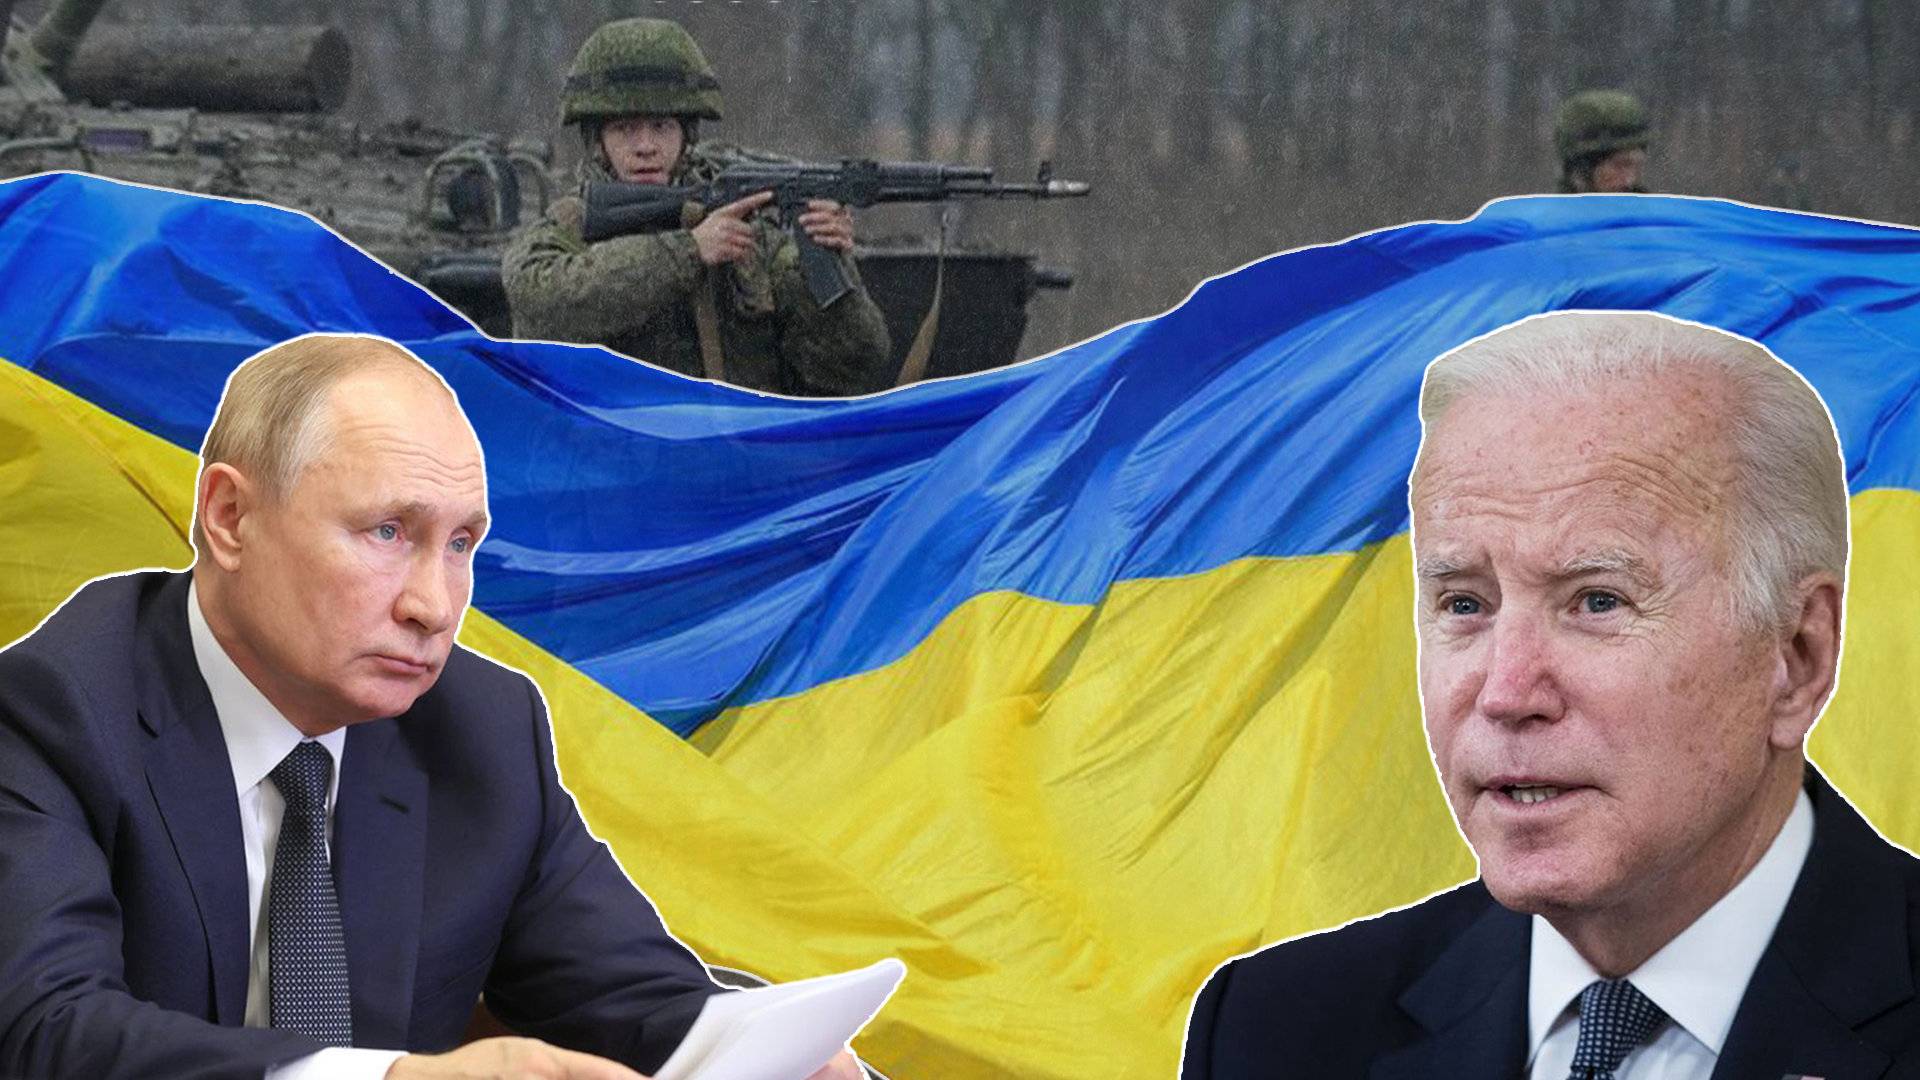 Analysis | Ukraine crisis: The ideological battle between Washington and Moscow lingers The Informant247